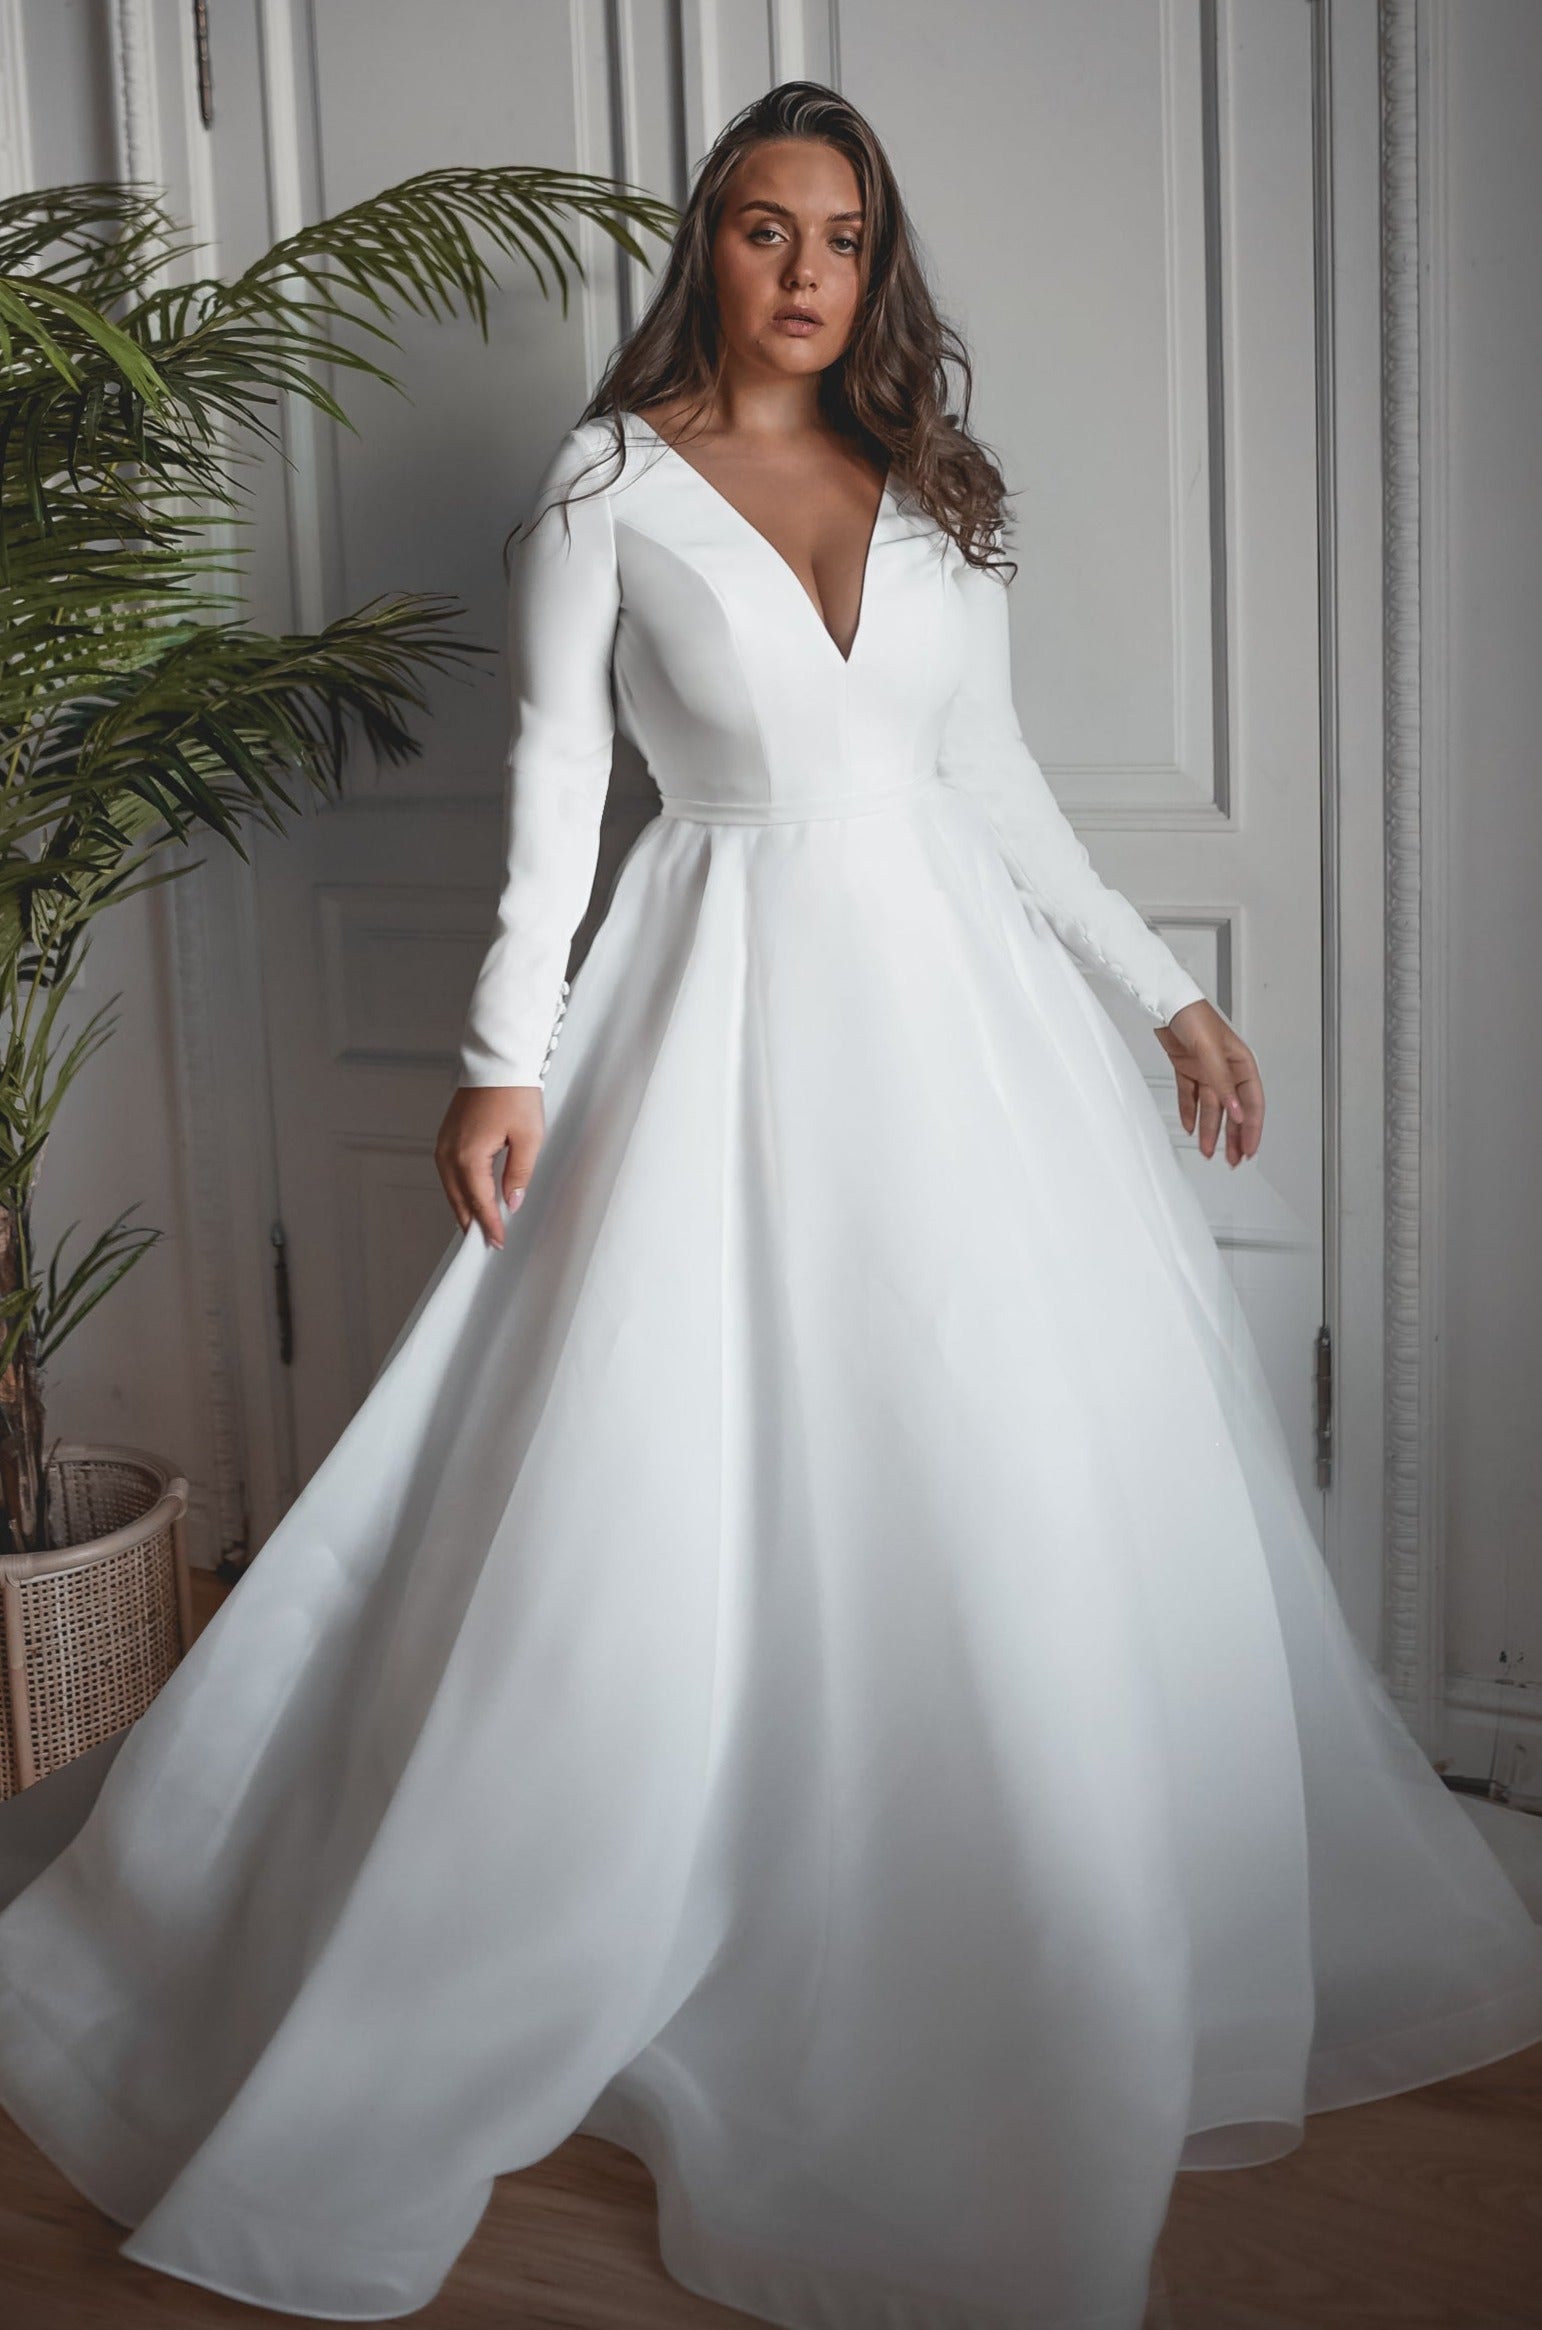 Stunning Long Sleeves, Detachable Skirt, All Over Lace Fitted Wedding Dress  Available in Plus Size 18us 26 Us -  Finland